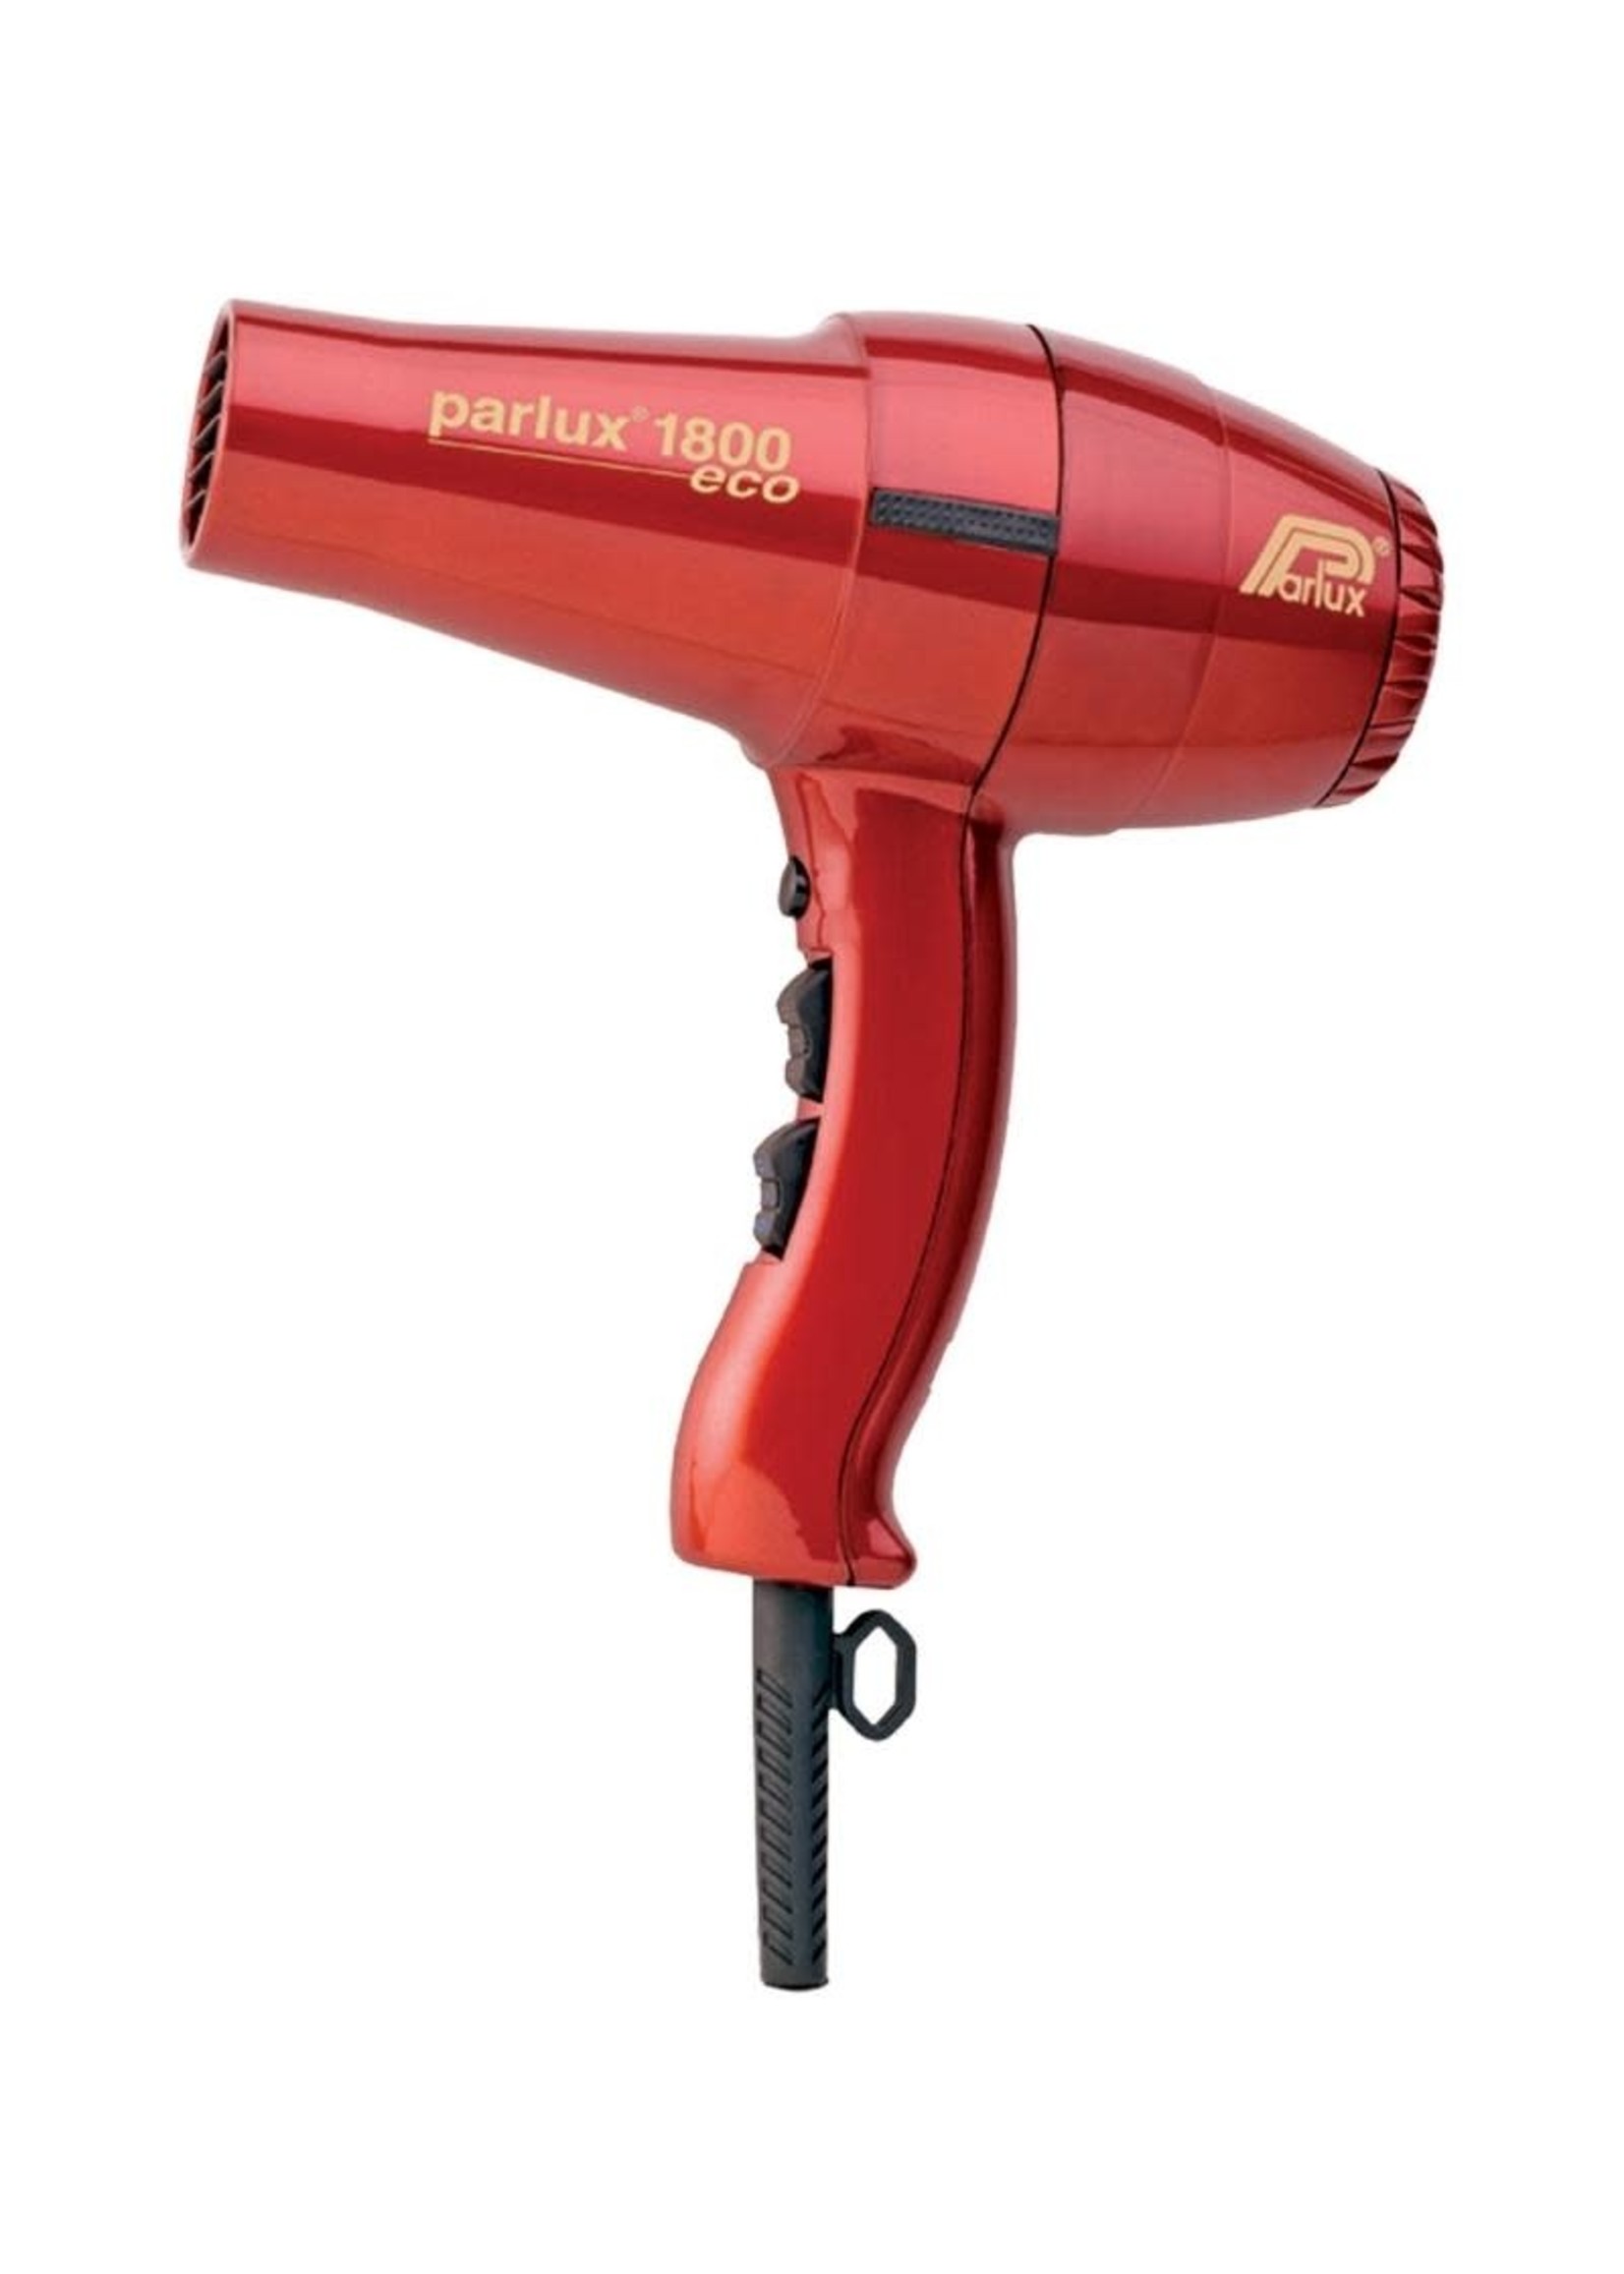 Parlux Parlux 1800 Eco Hairdryer - Red